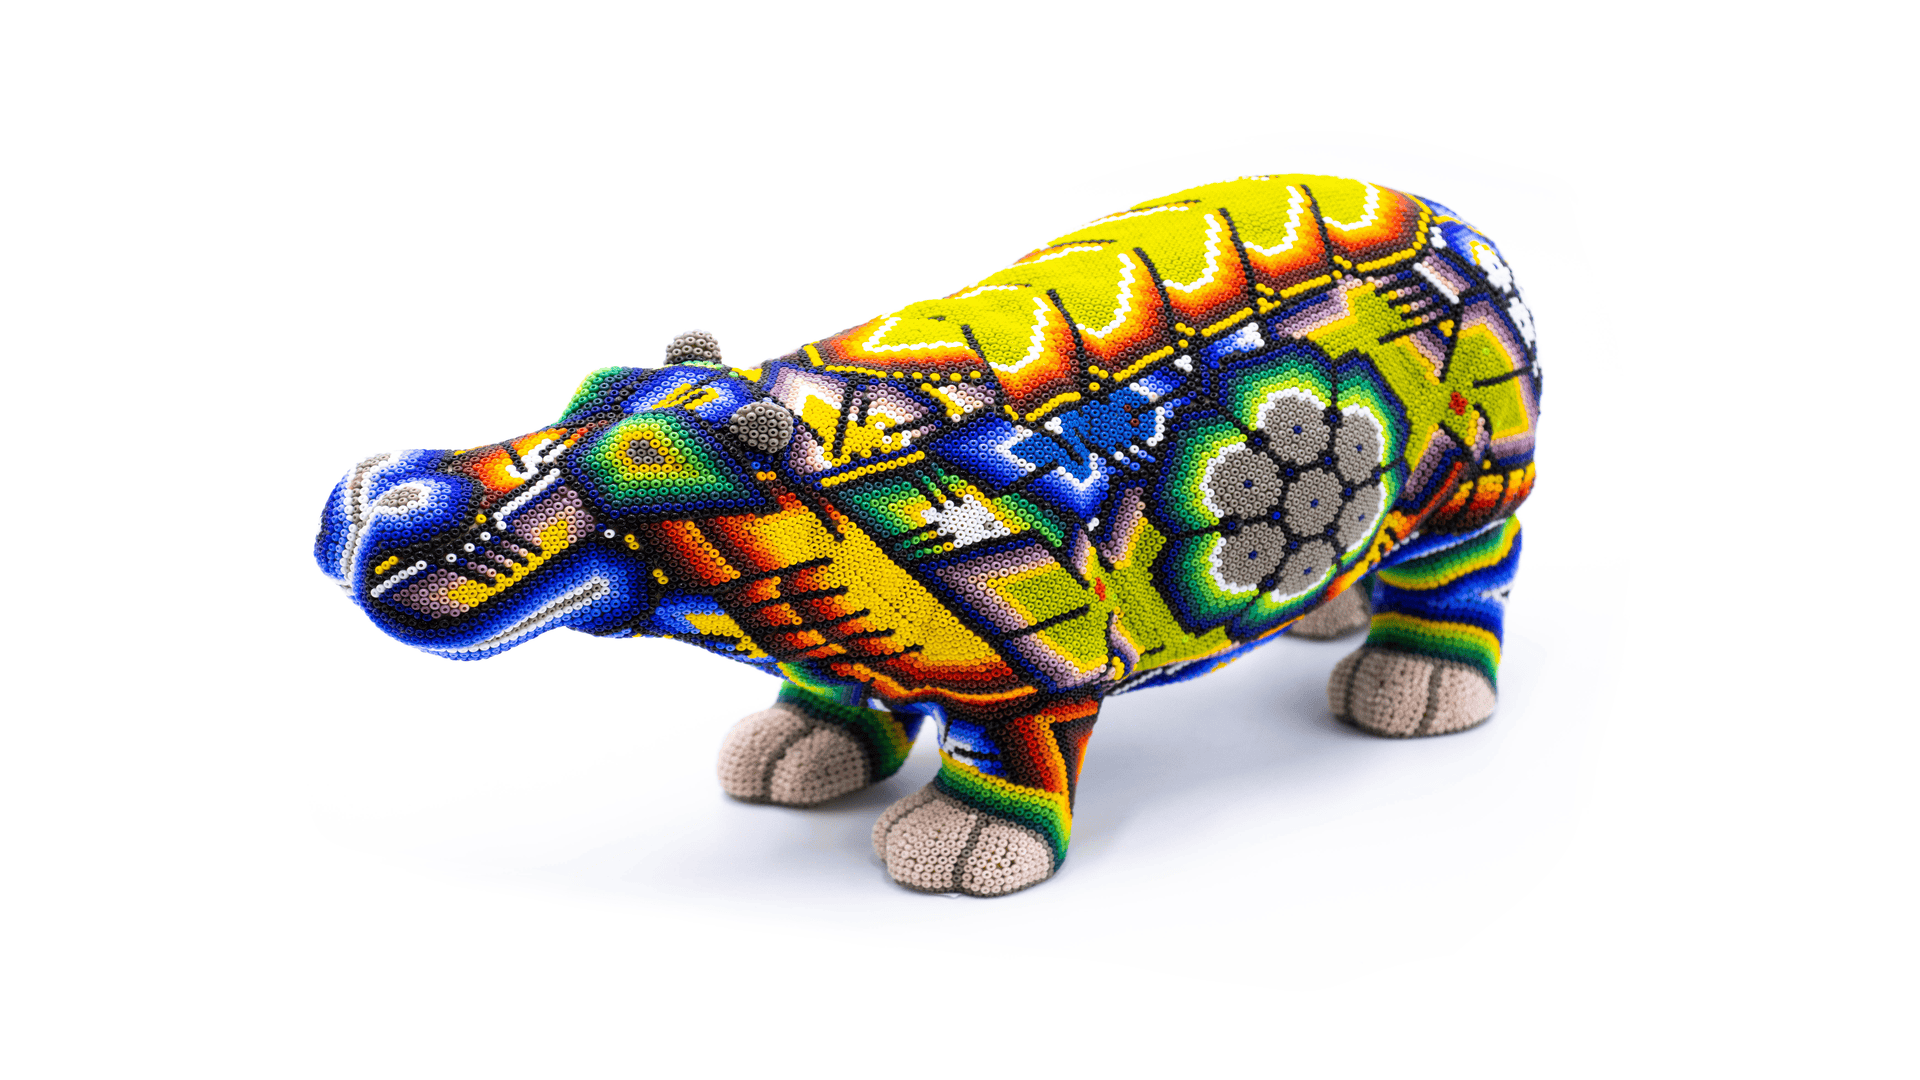 Vibrant hand-beaded hippopotamus figurine in a dynamic stance, featuring a bright yellow and blue color scheme with traditional Huichol-style patterns and floral motifs, expertly crafted and isolated on a white background.